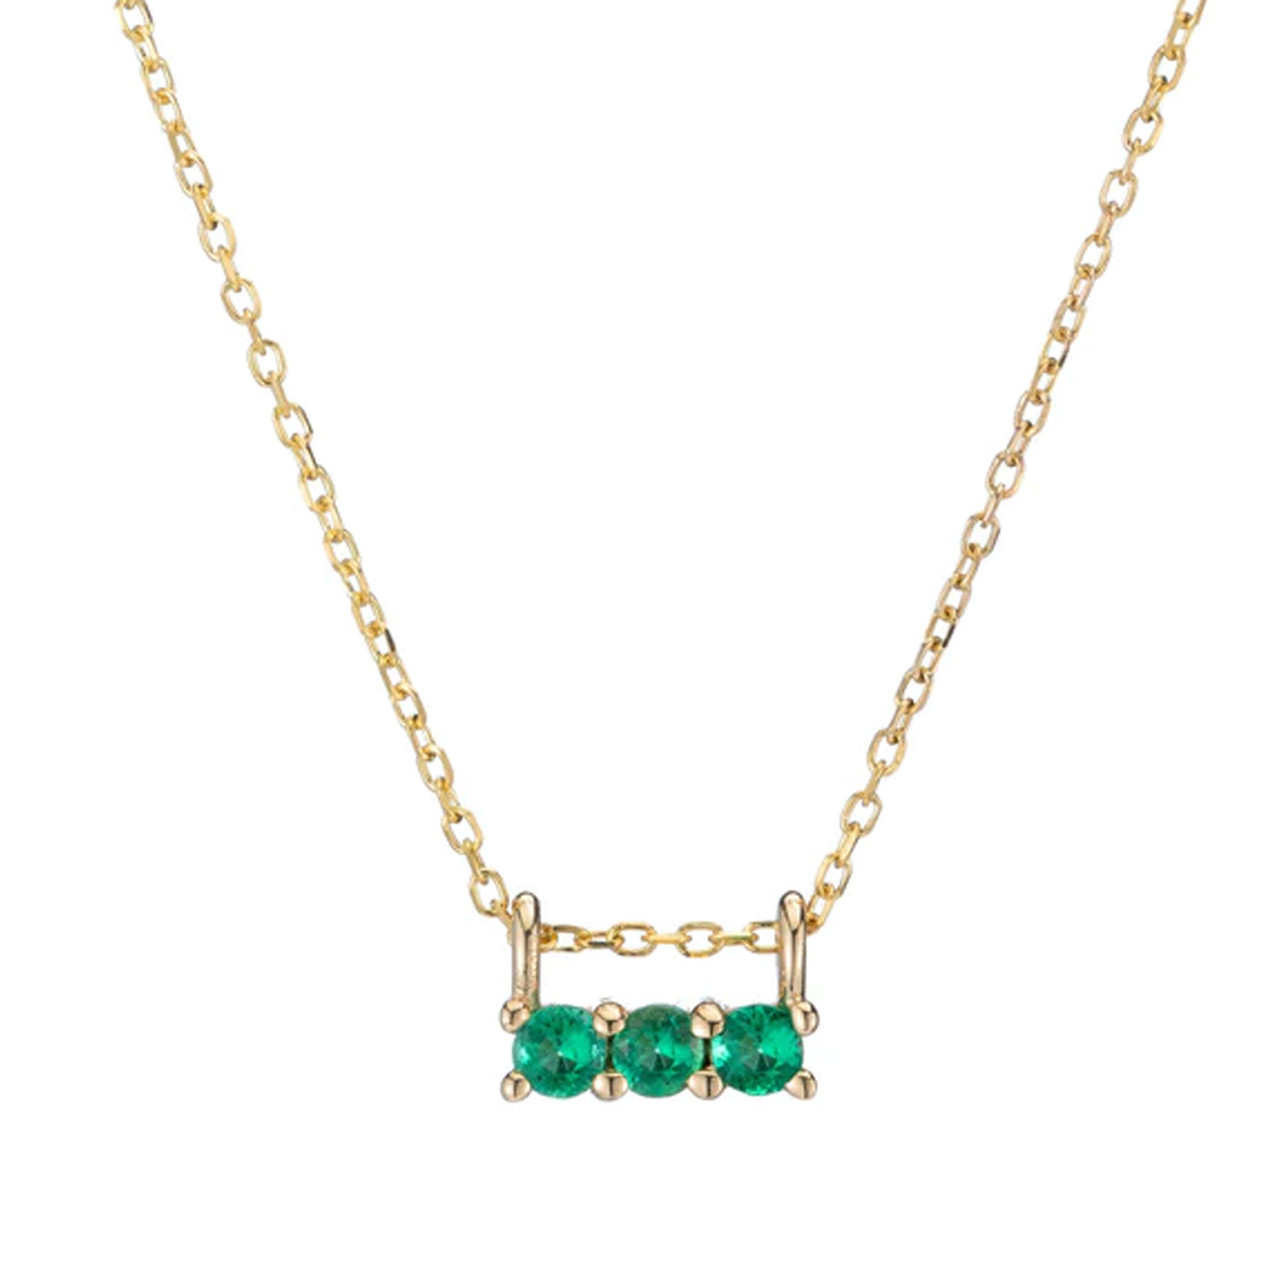 EMERALD 3S NECKLACE By Jennie Kwon